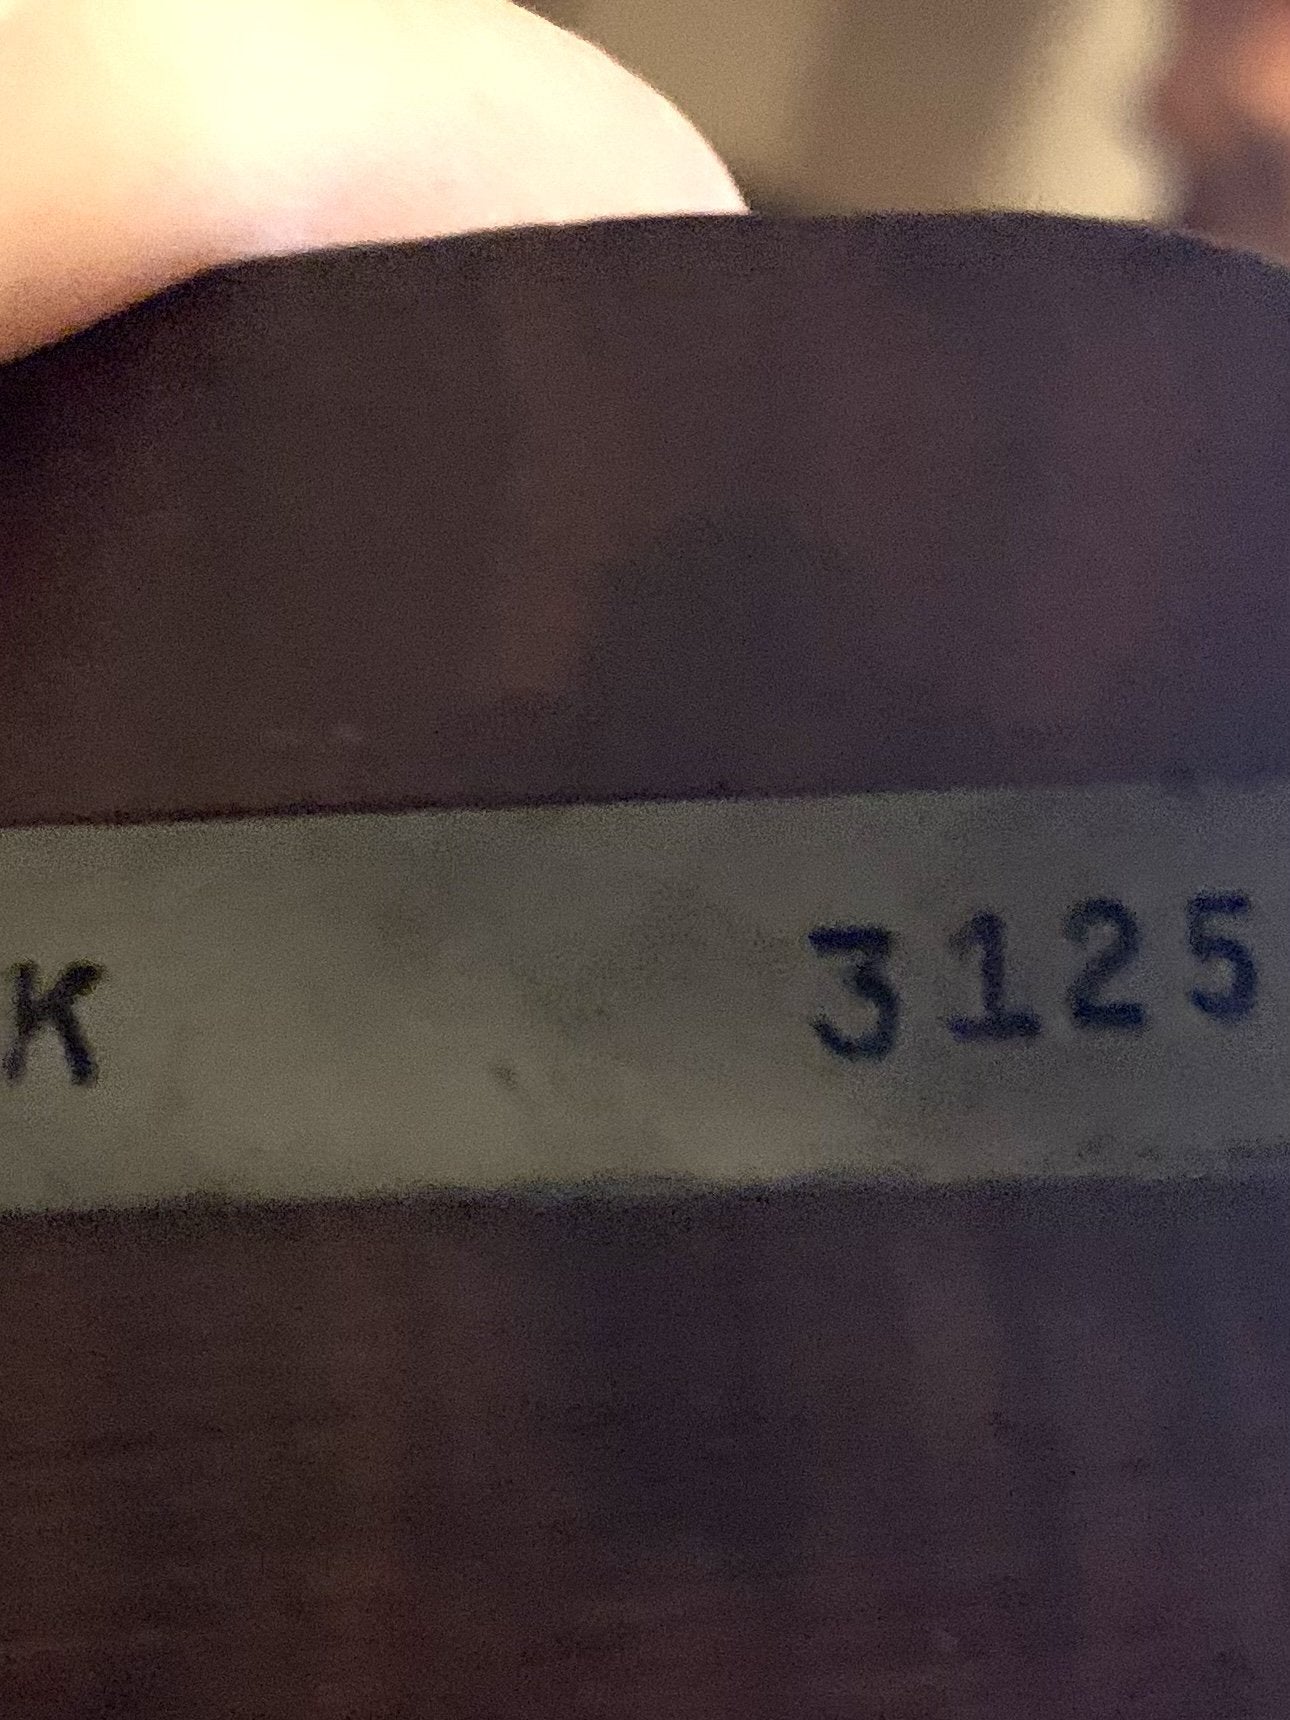 HELP Identifying 38 | Smith And Wesson Forums